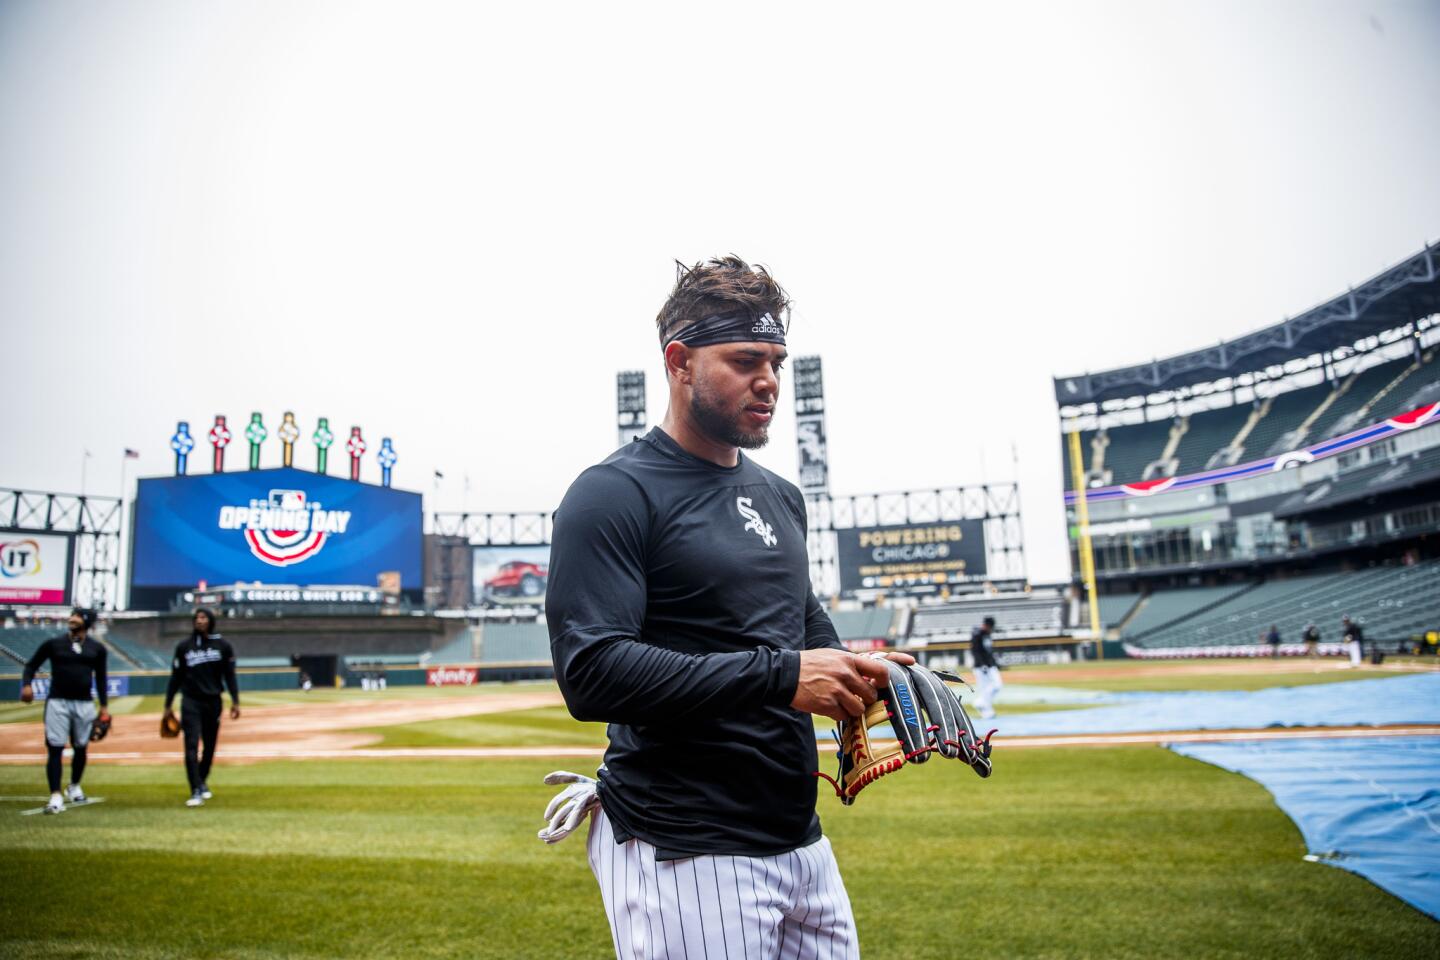 White Sox third baseman Yoan Moncada walks on the field before the first inning against the Mariners on April 5, 2019, at Guaranteed Rate Field.